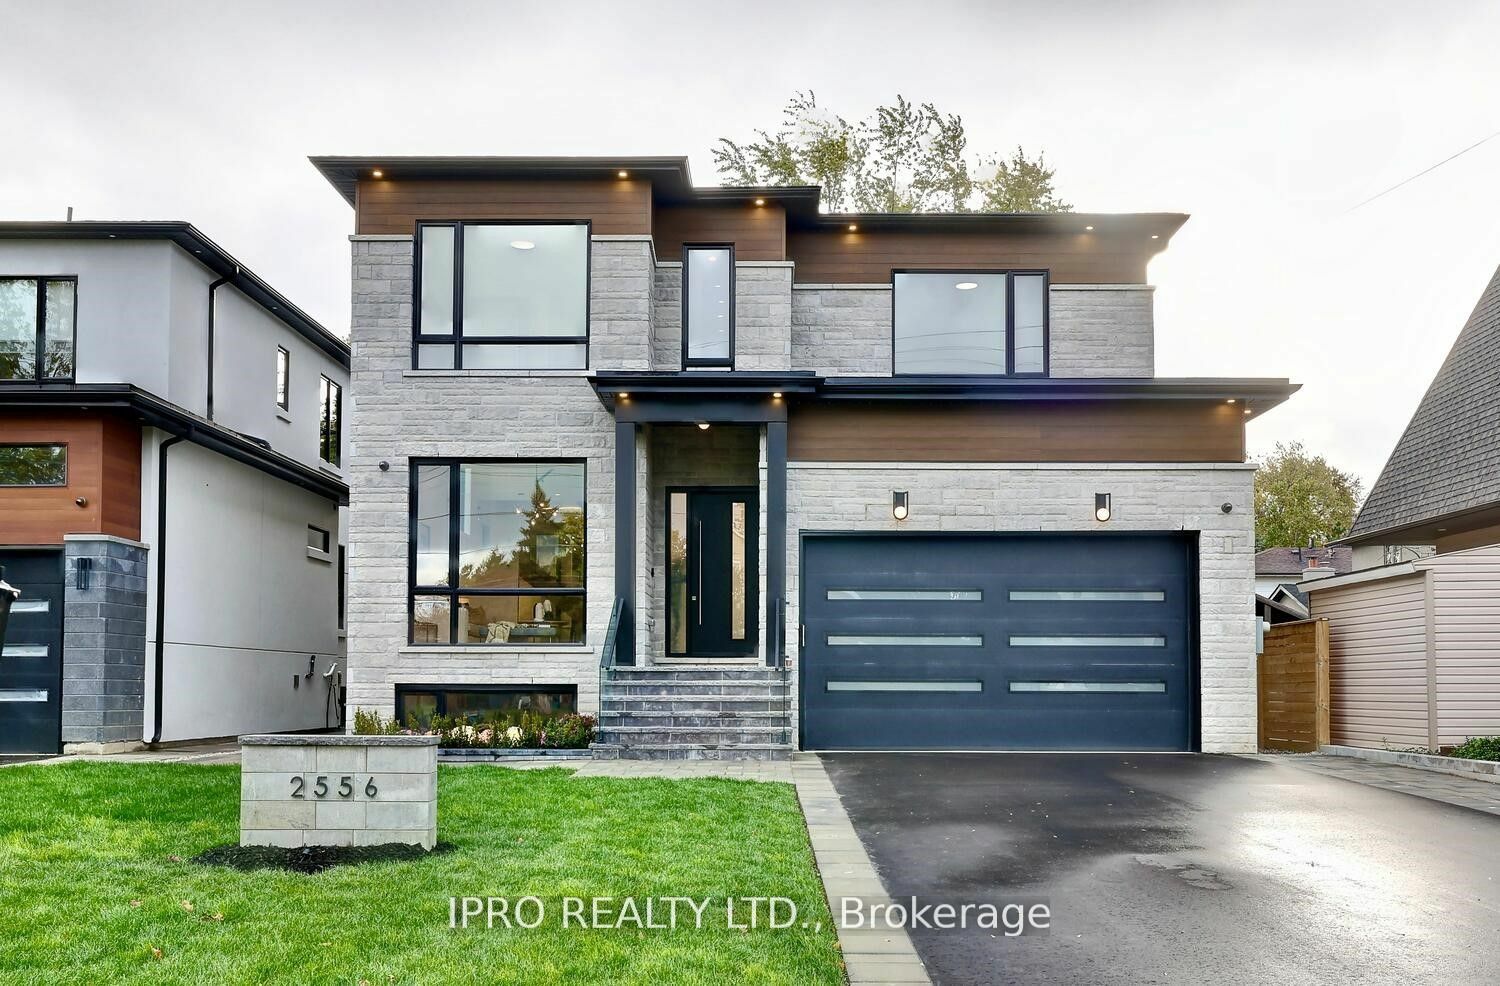 Property Photo:  2556 Glengarry Rd  ON L5C 1Y3 